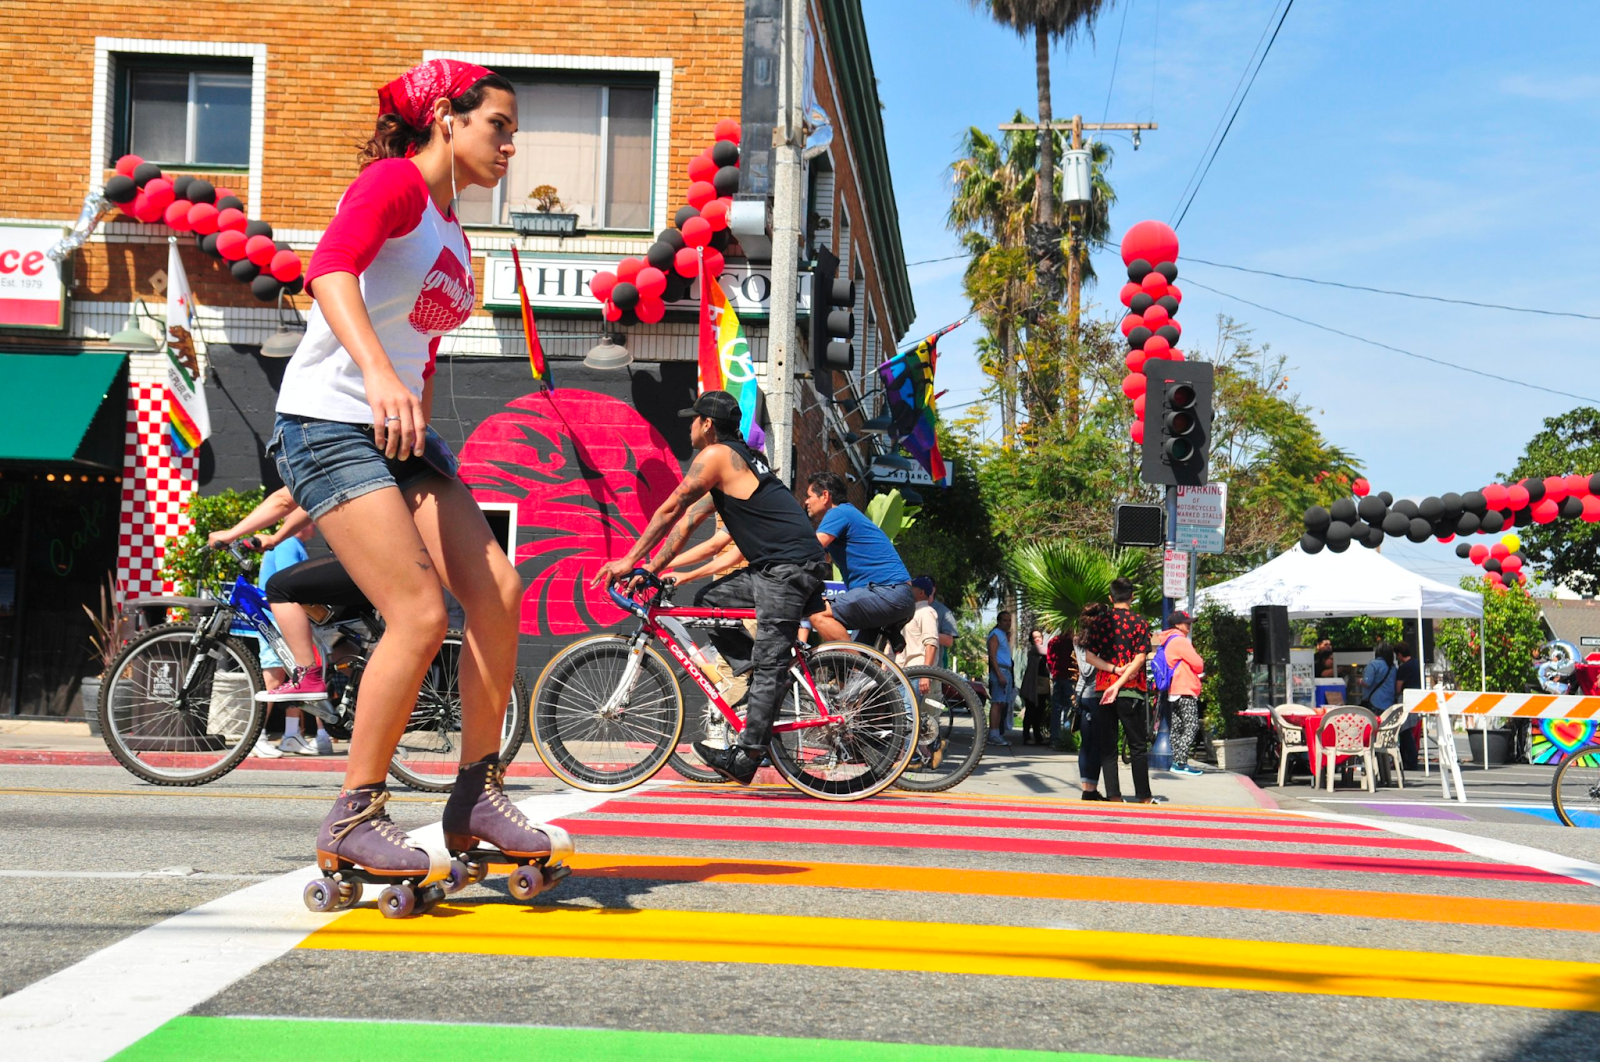 A roller skater and bicyclist cross a rainbow-colored crosswalk